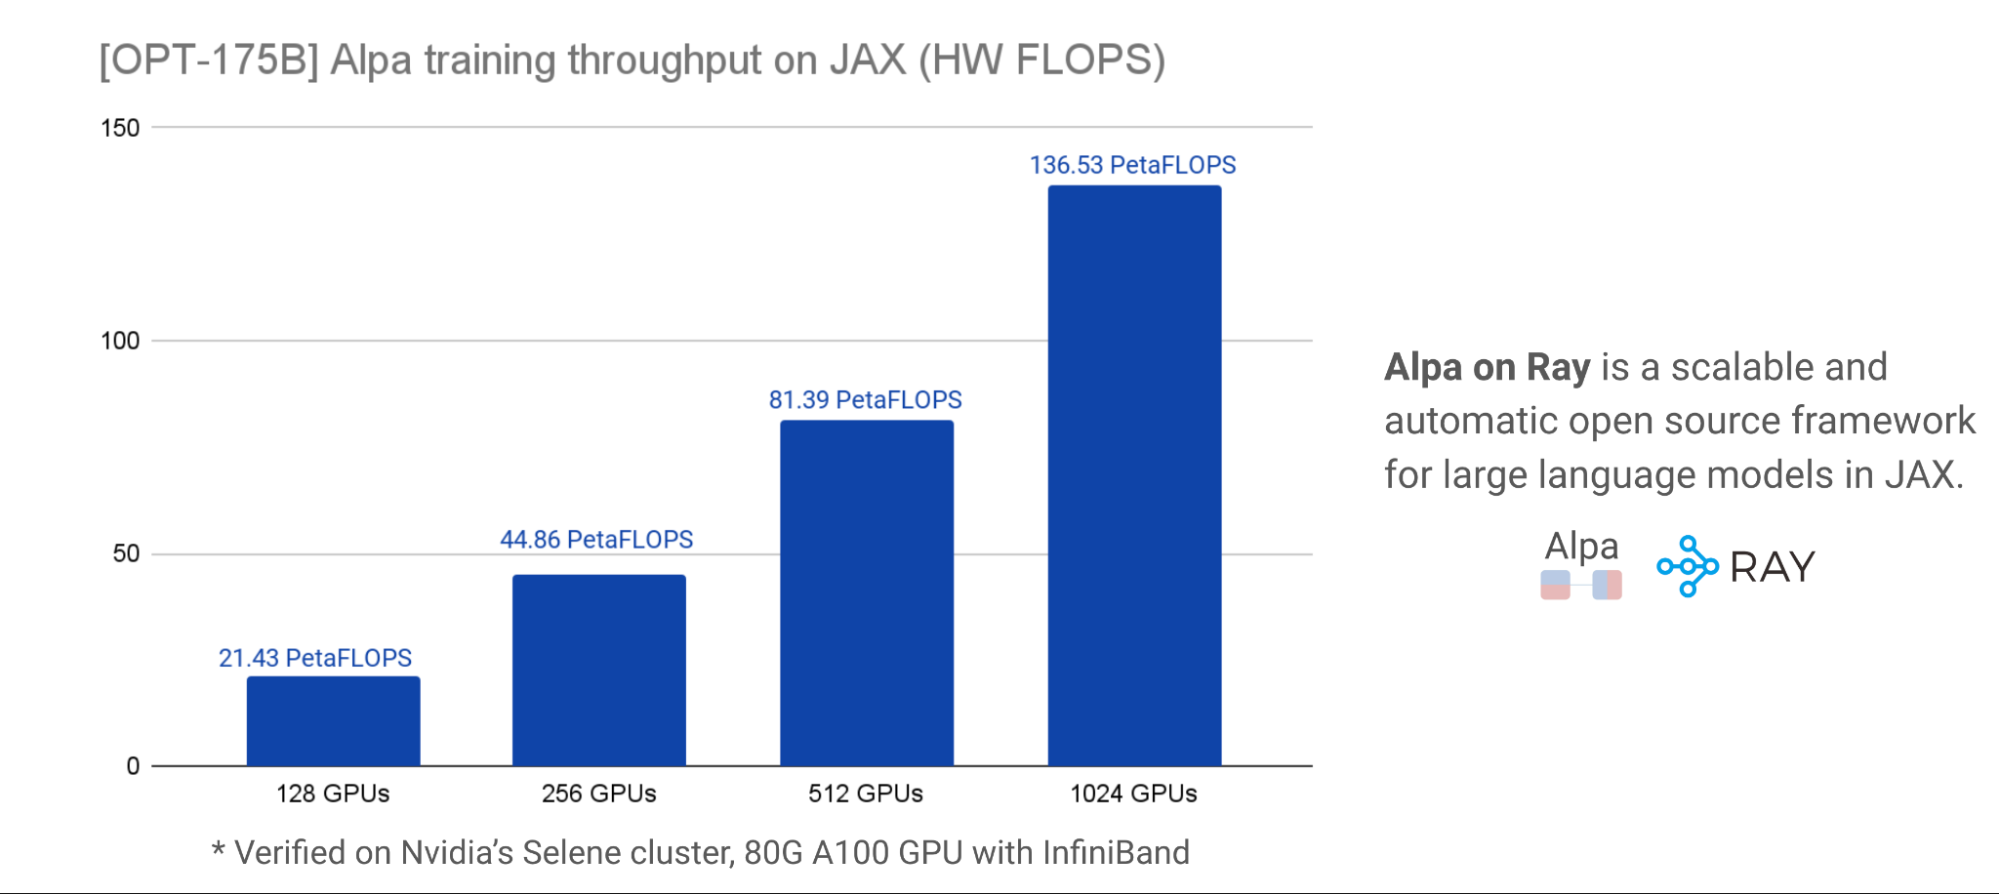 Benchmark results show that Alpa on Ray scales linearly with the number of GPUs, from 128 GPUs to 1024 GPUs
